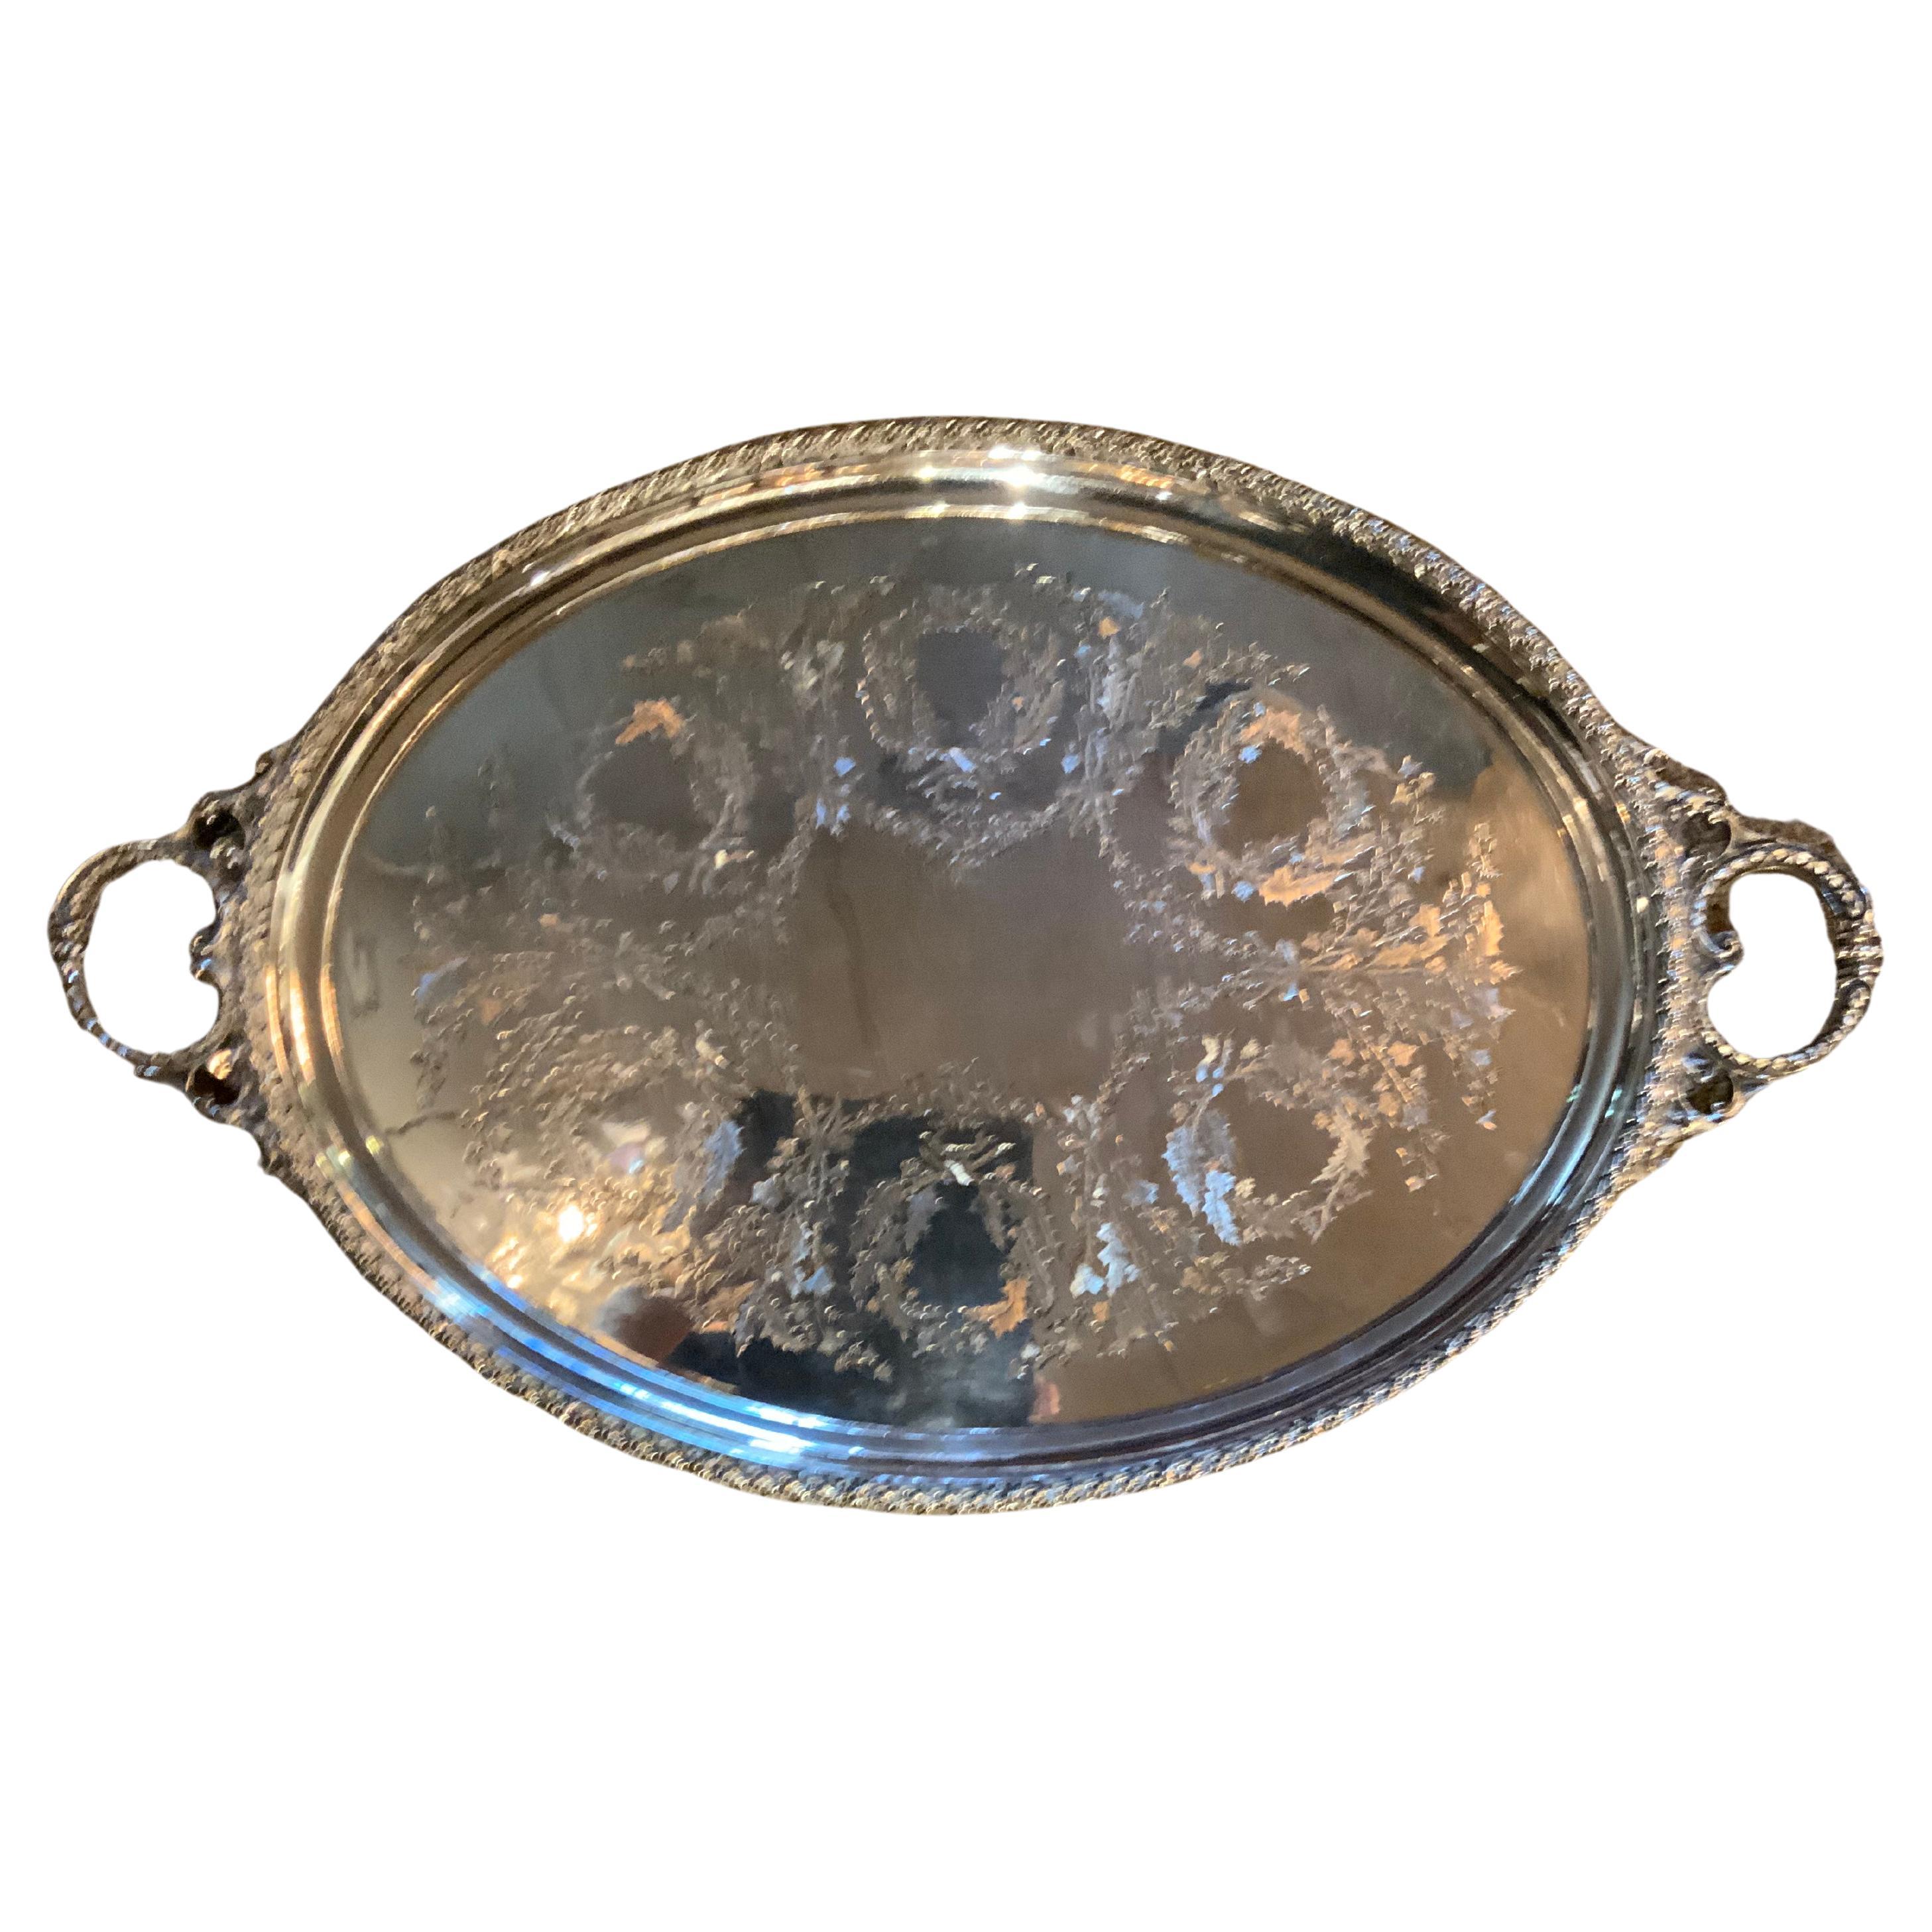 Sterling Silver Oval Serving Tray Engraved Wreaths of Holly C 1860